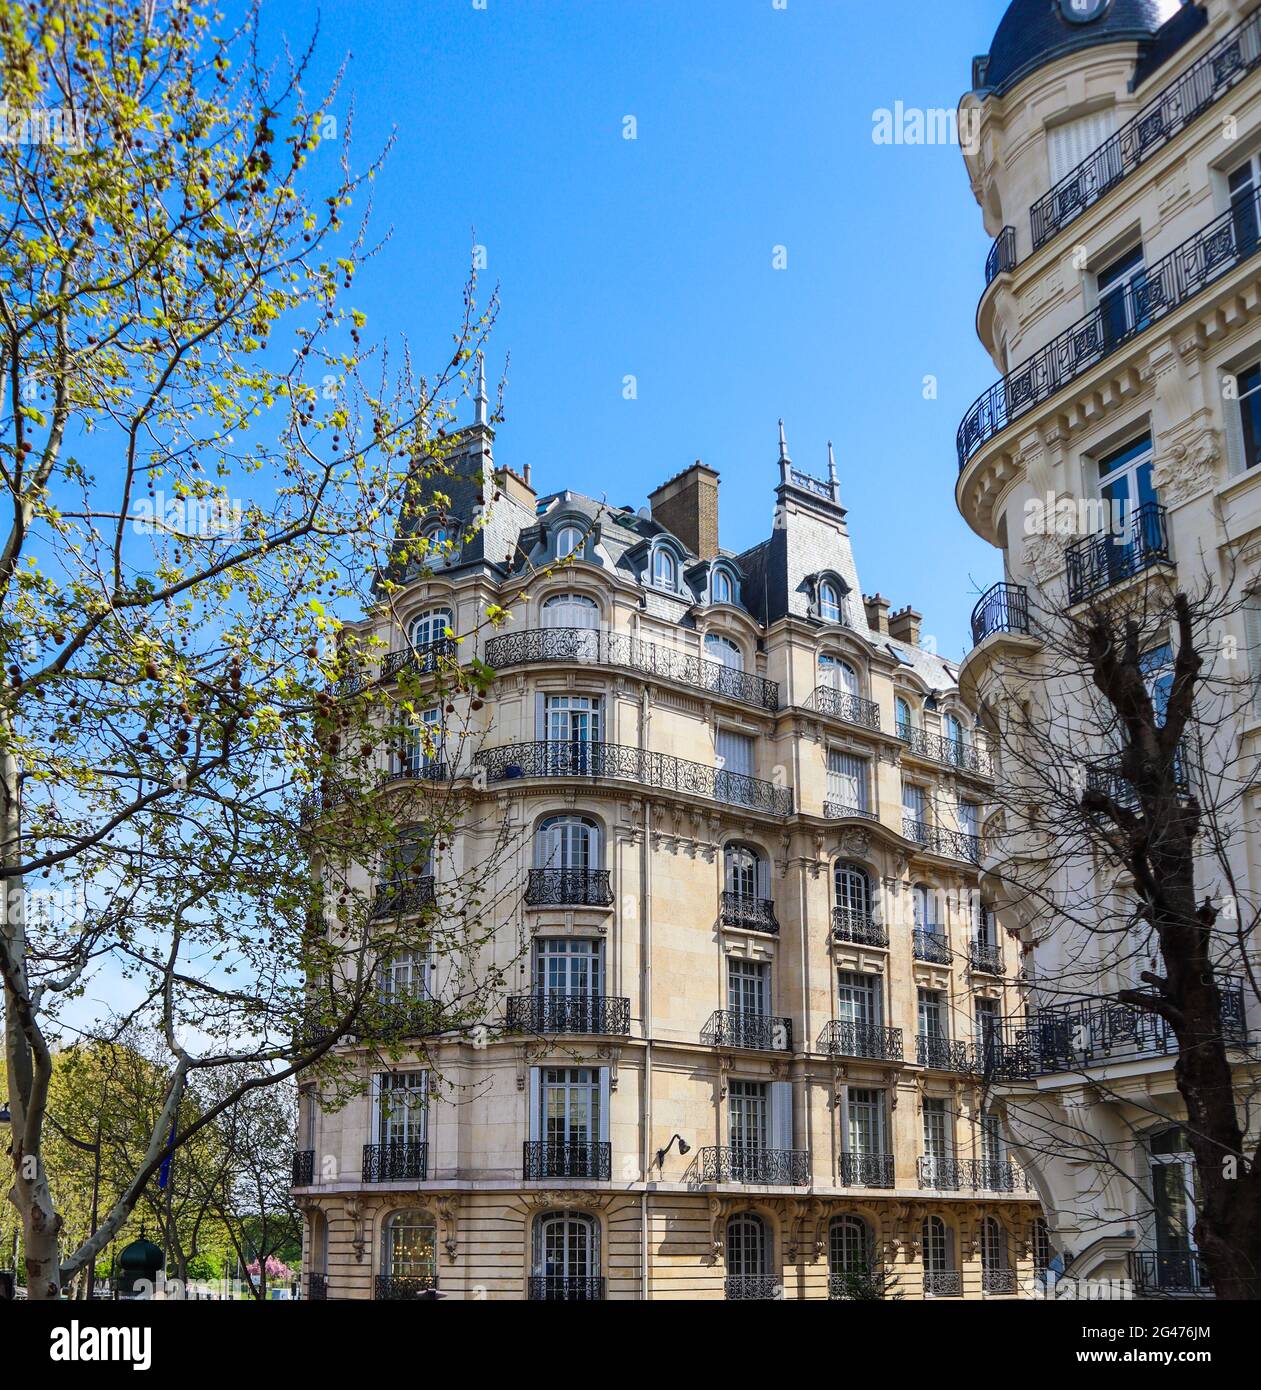 Architecture of Paris France. Facades of a traditional apartment buildings Stock Photo